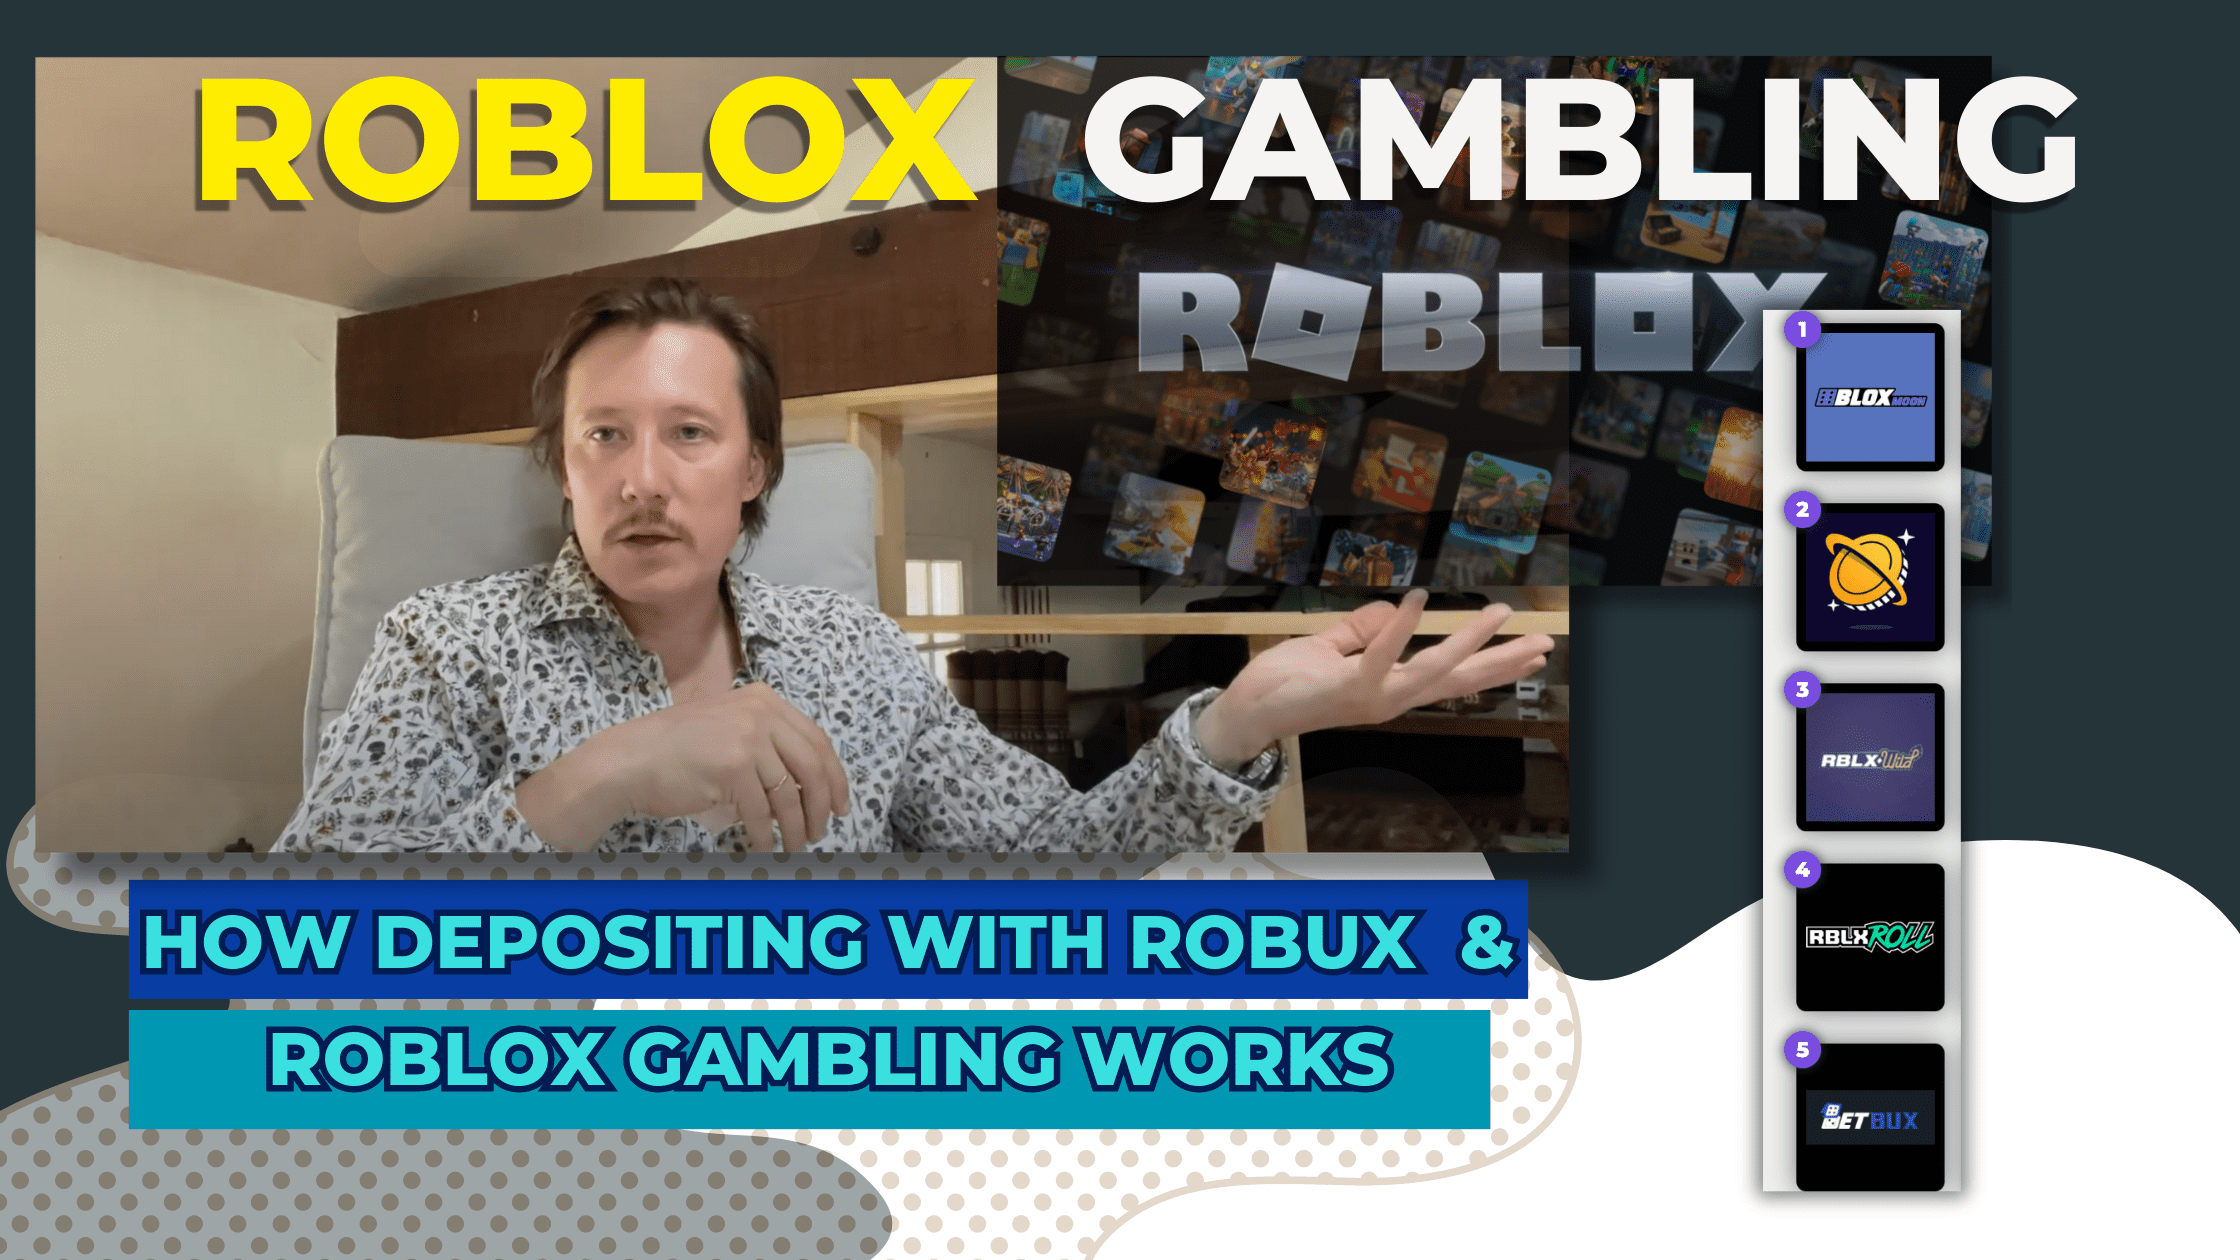 Roblox gambling: a Robux coins gambling. How it works for casinos and why it’s tolerated by Roblox?